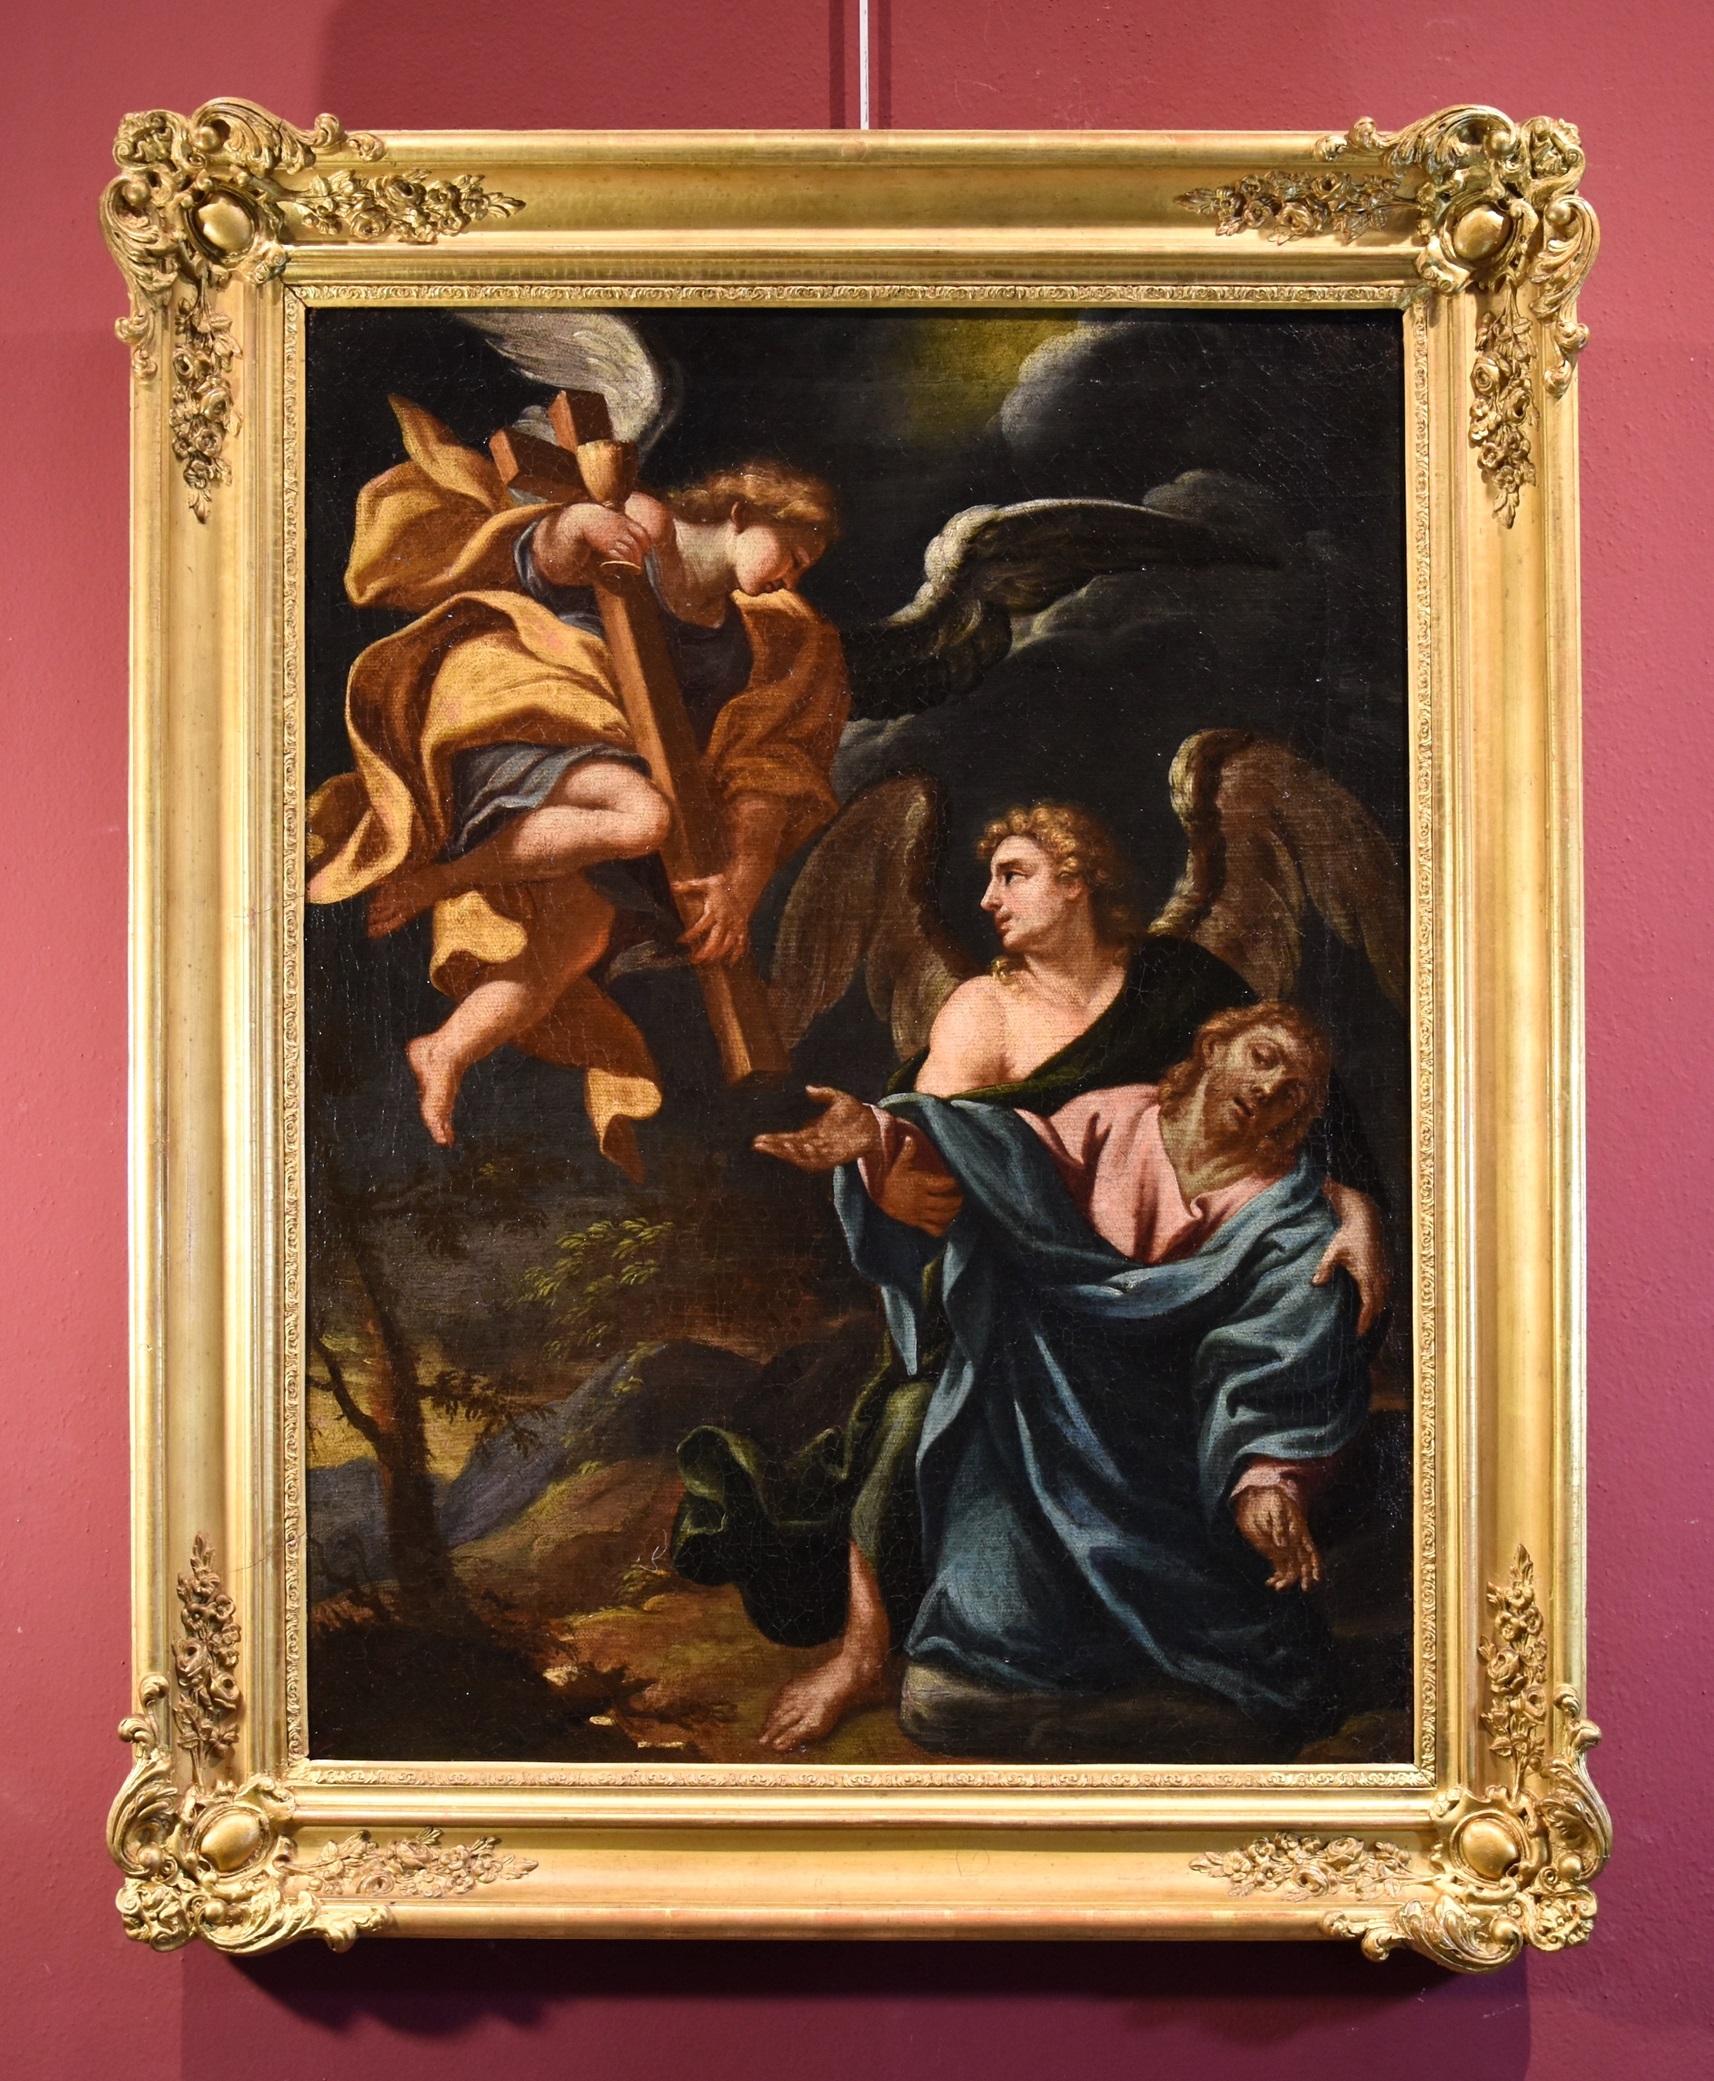 Christ Angels Pietro Da Cortona Paint 17th Century Oil on canvas Old master Art - Painting by Pietro da Cortona (Cortona 1597 - Rome 1669